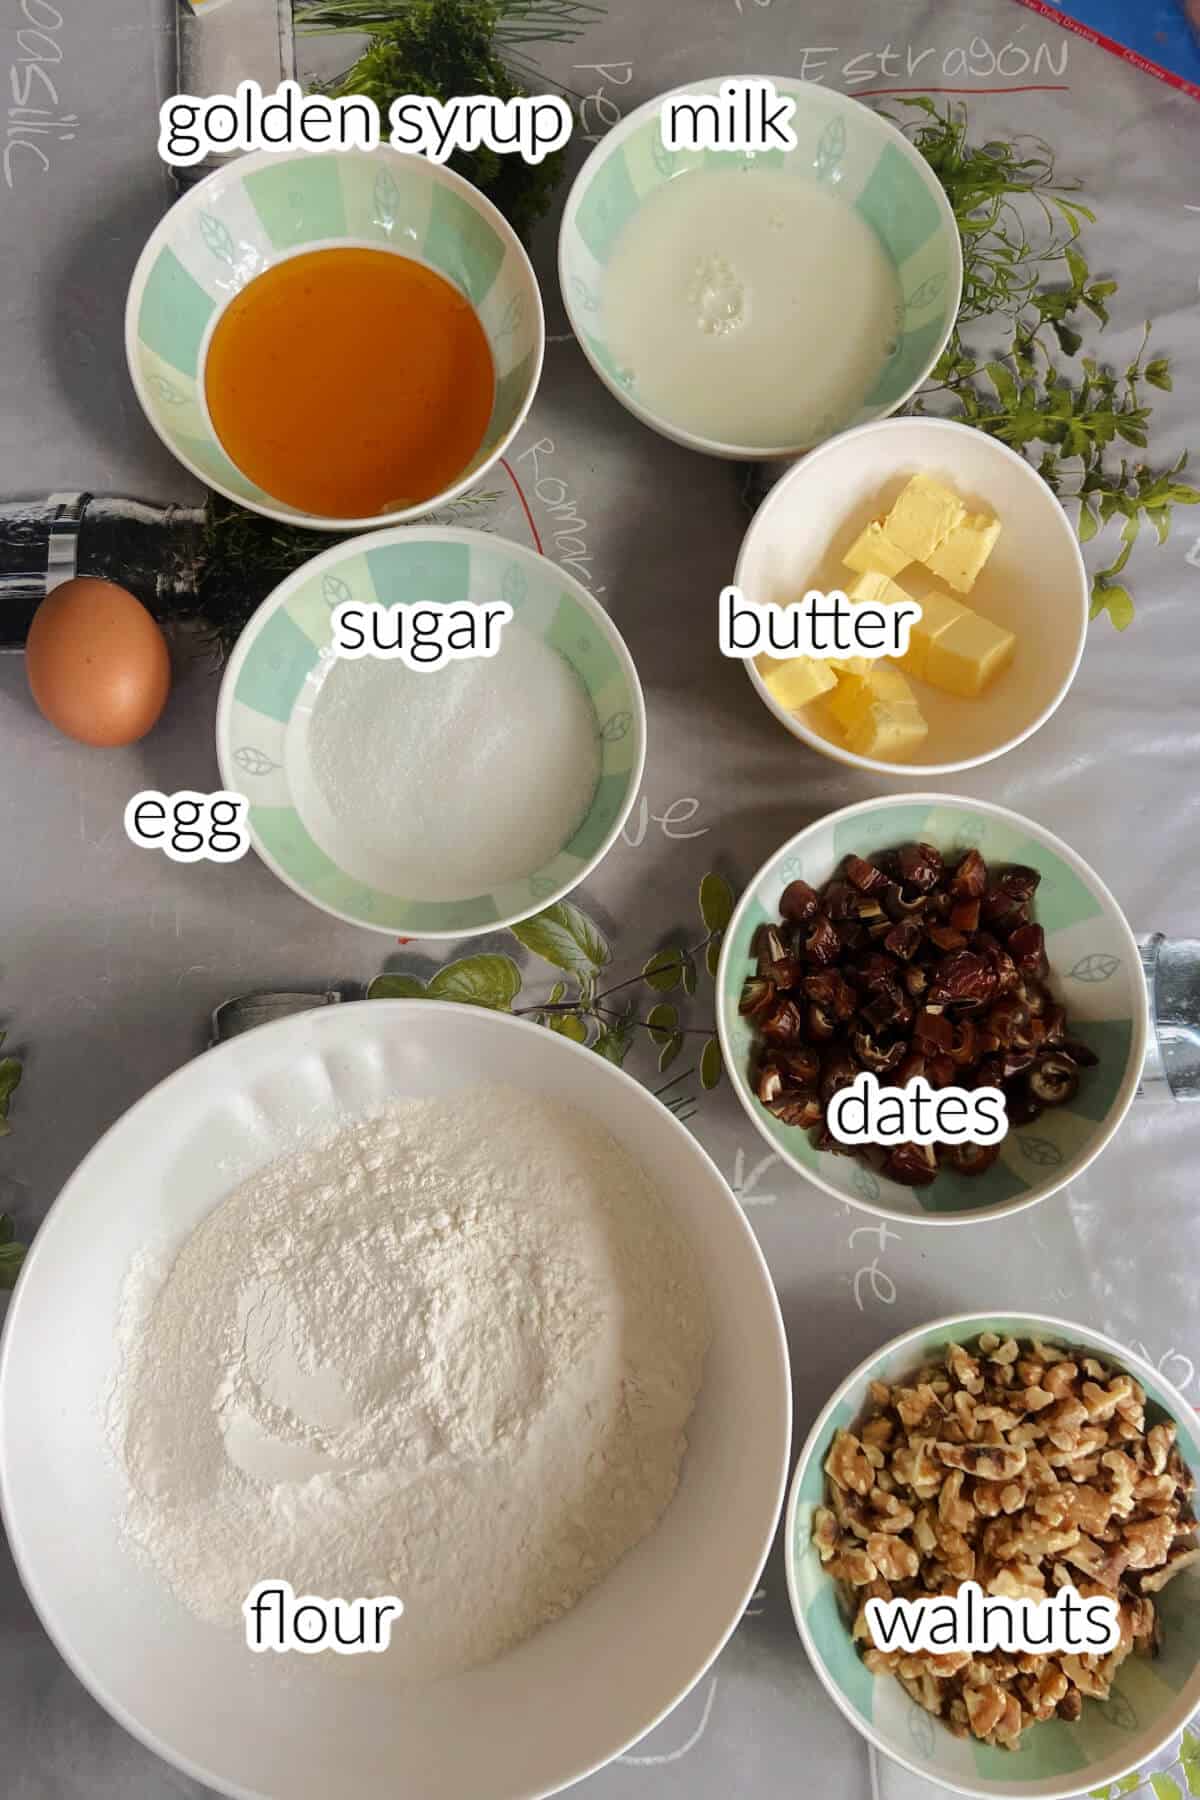 Ingredients used to make date and walnut cake.